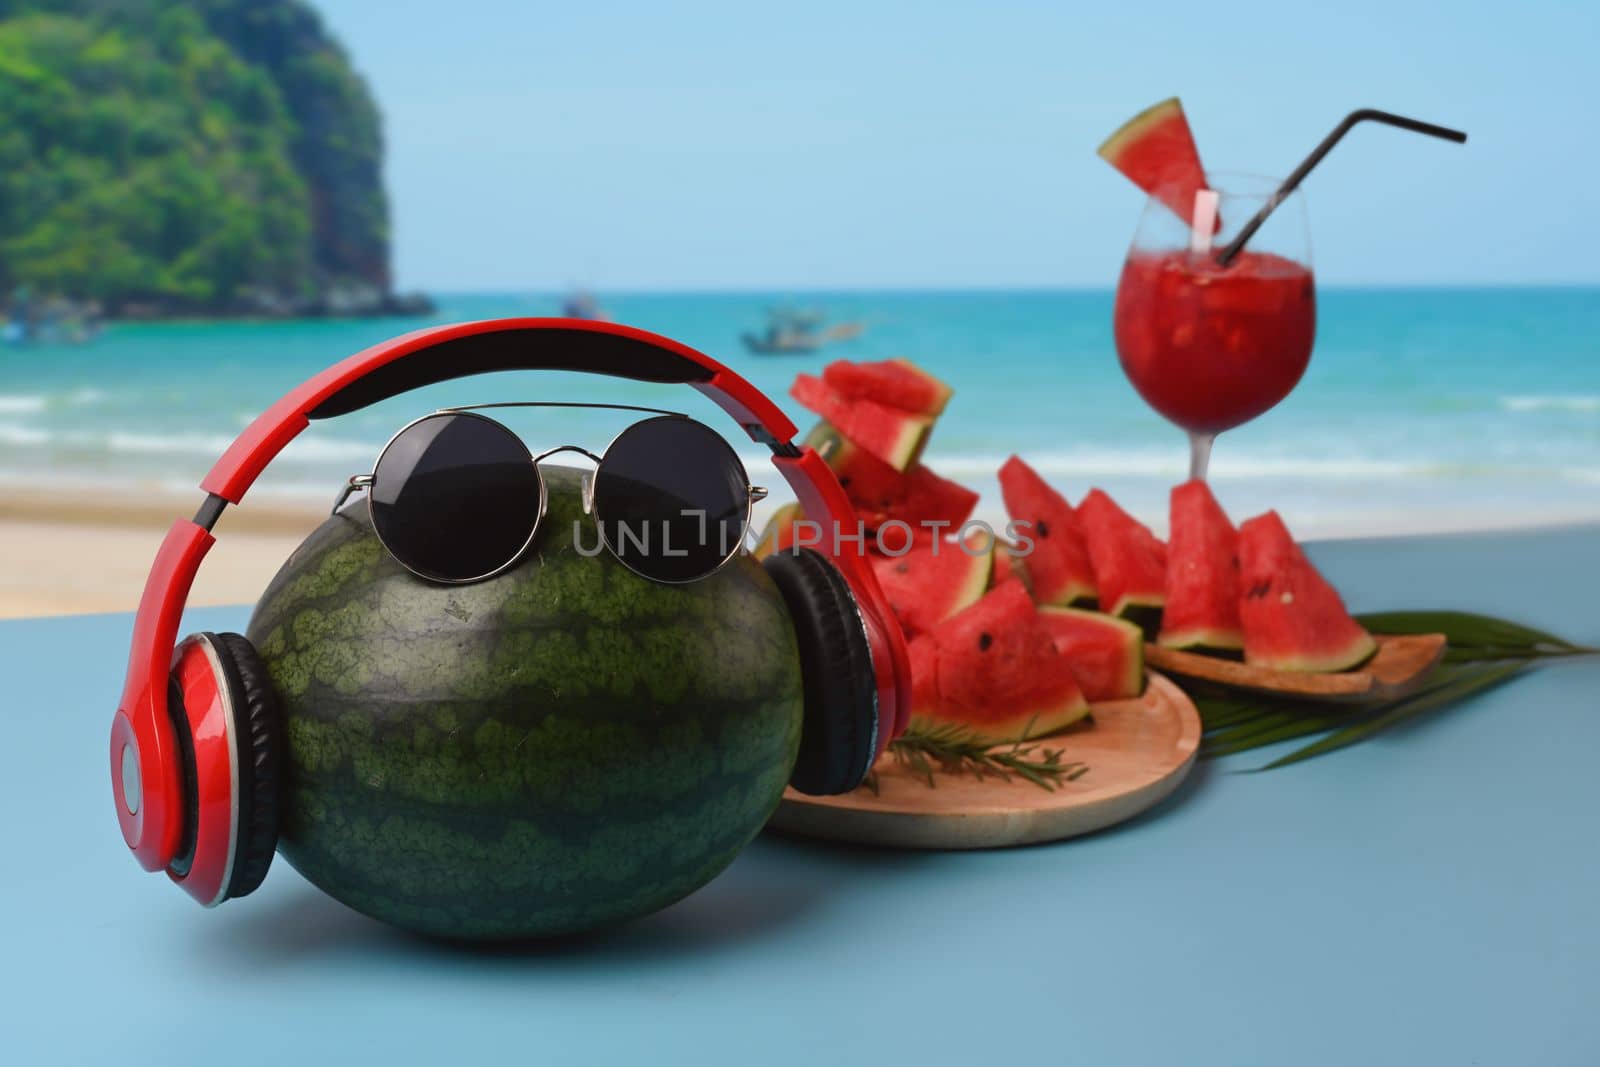 Whole watermelon and watermelon smoothie on table with beautiful summer beach in background.